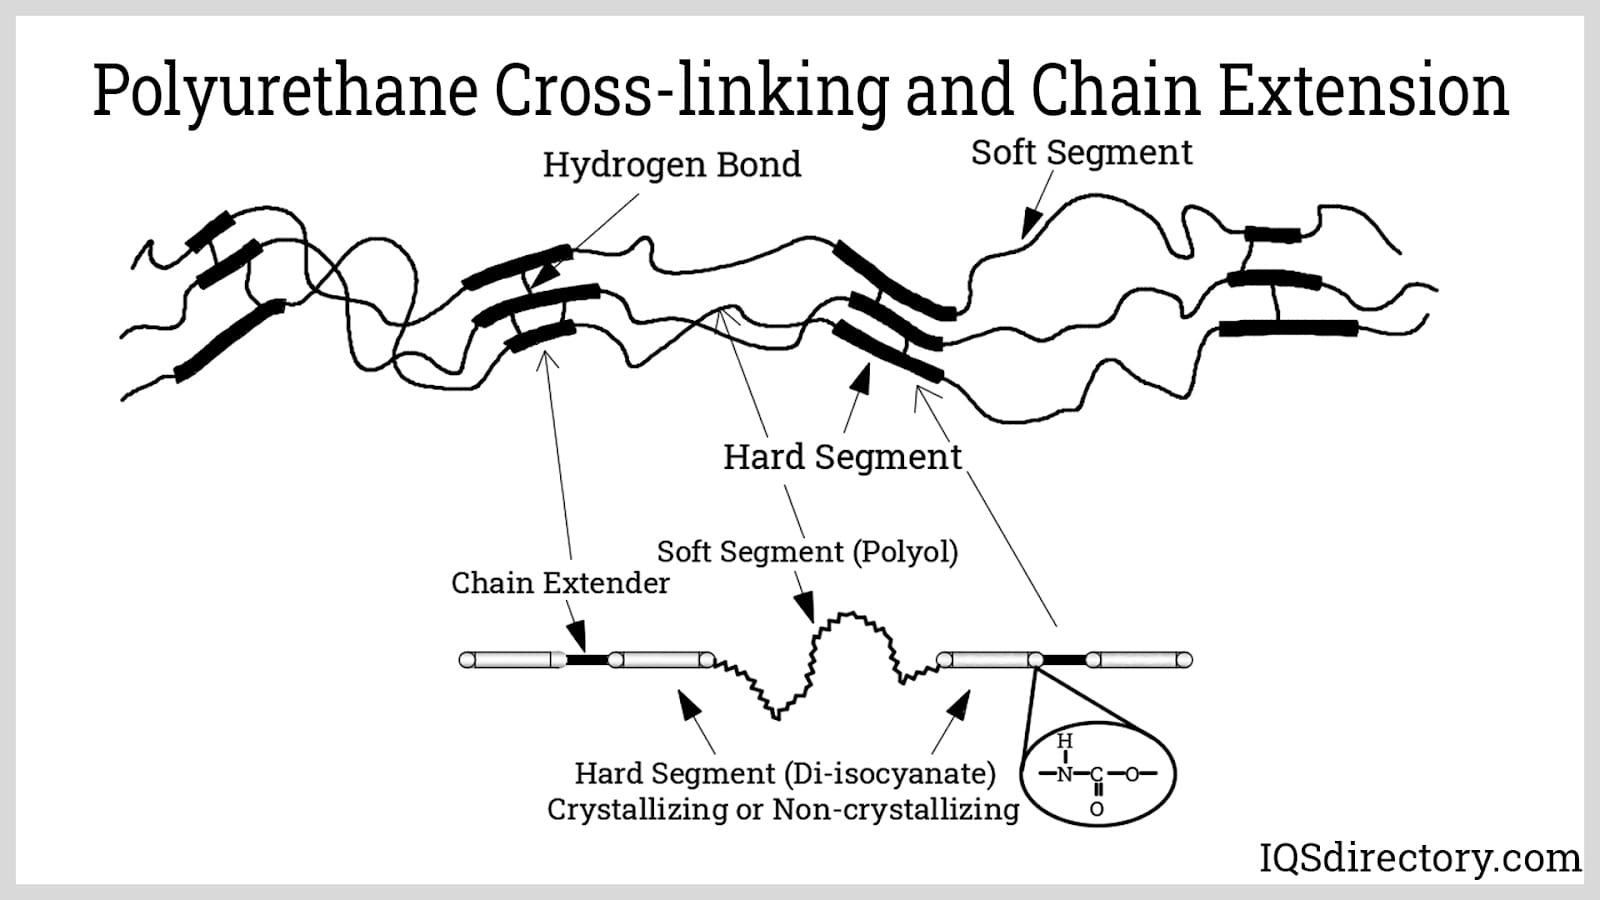 Polyurethane Cross-linking and Chain Extension